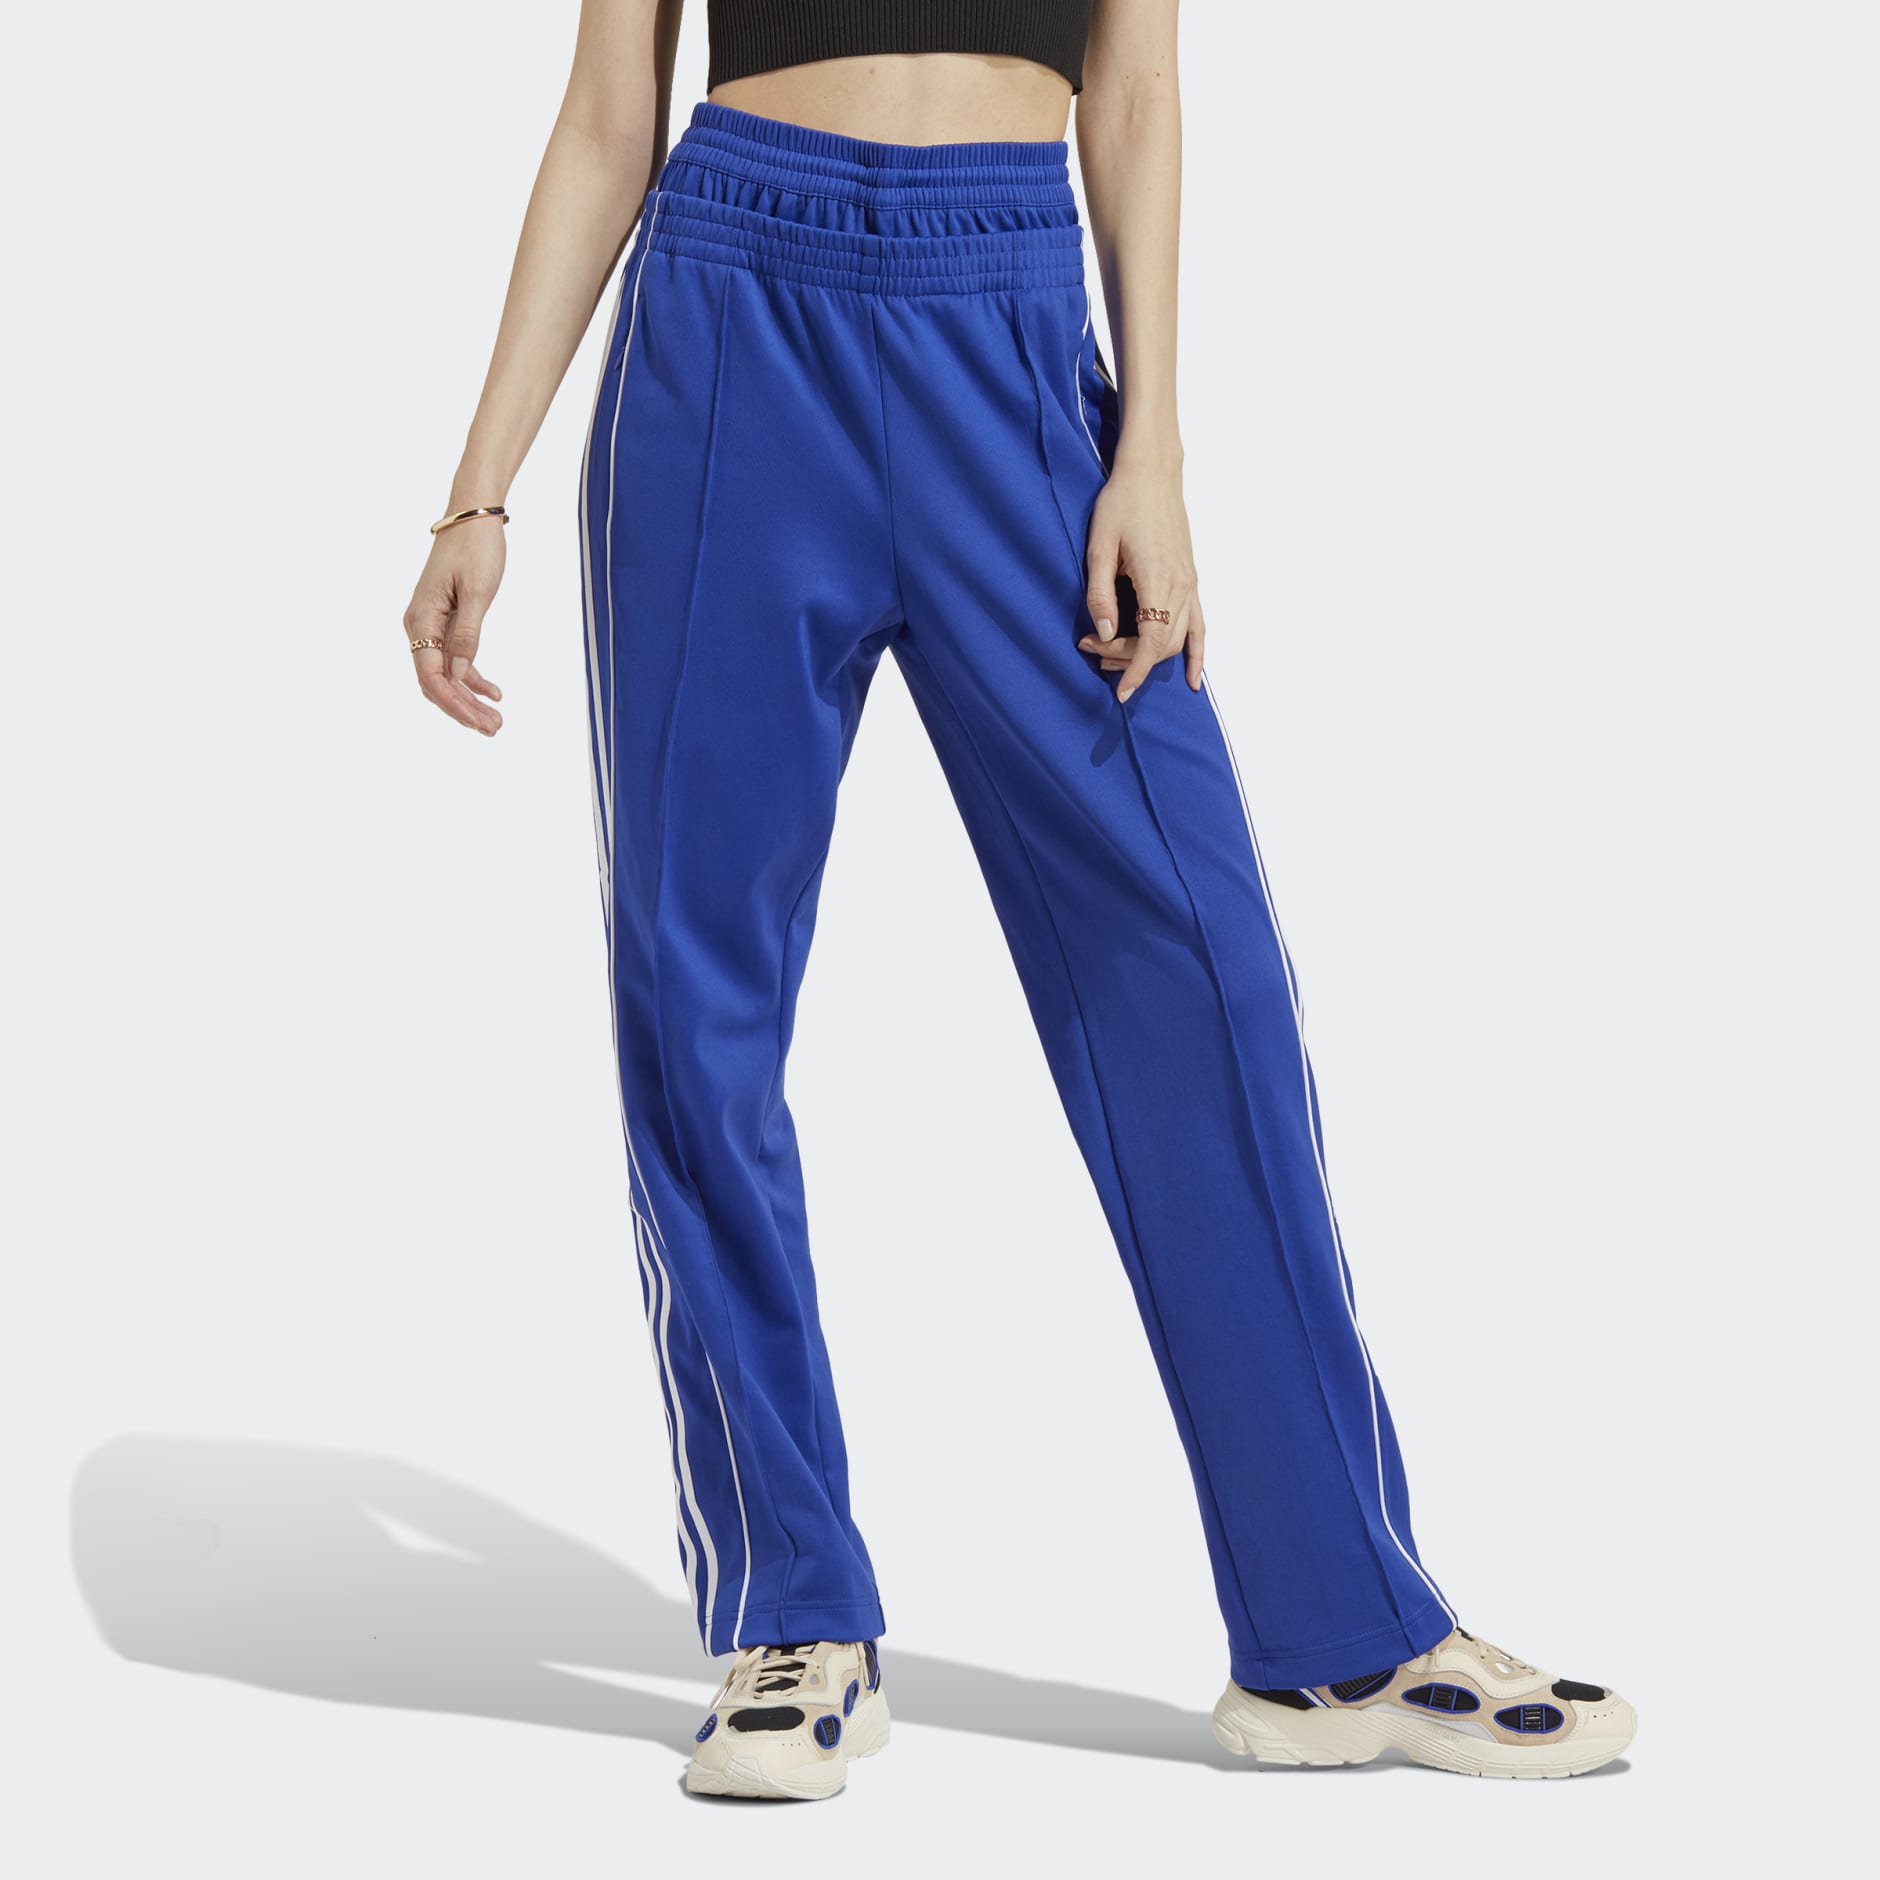 Amazon.com: adidas Women's Essentials Warm-Up Tricot Regular 3-Stripes  Track Pants, Preloved Blue/White, Medium : Clothing, Shoes & Jewelry